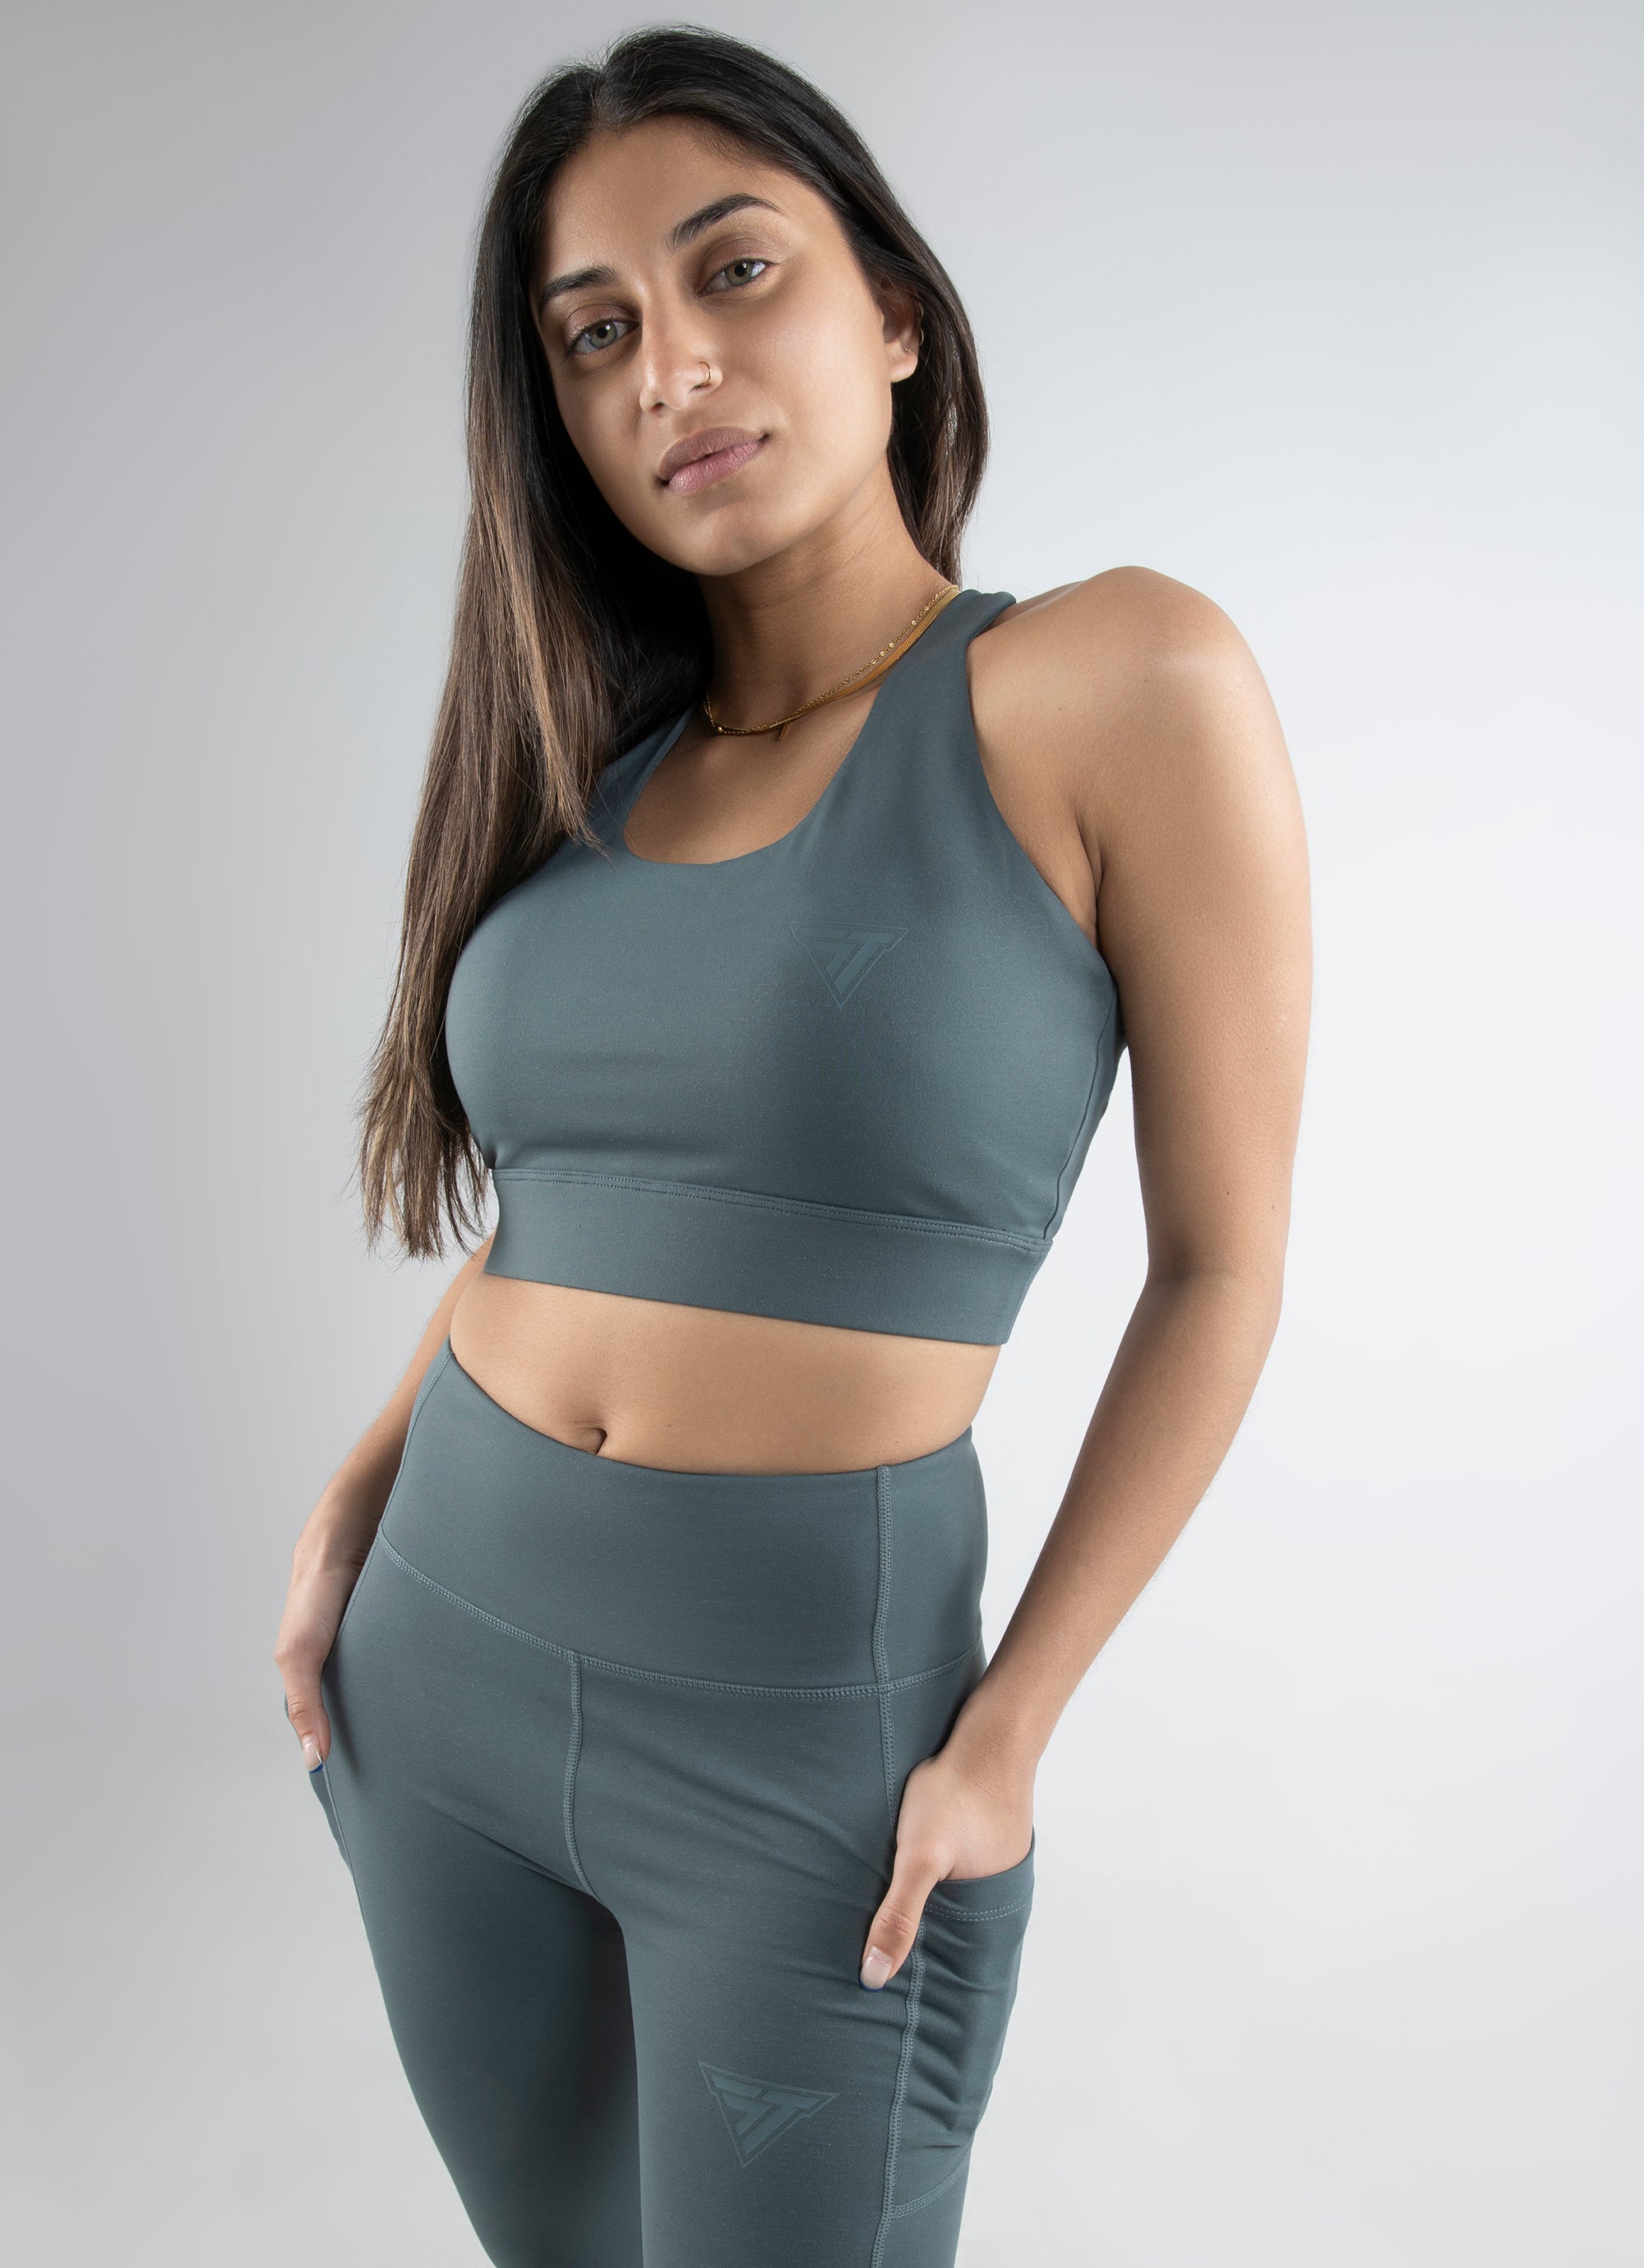 https://www.redrat.co.nz/content/products/stryde-try-out-sports-bra-deep-jade-front-54002.jpg